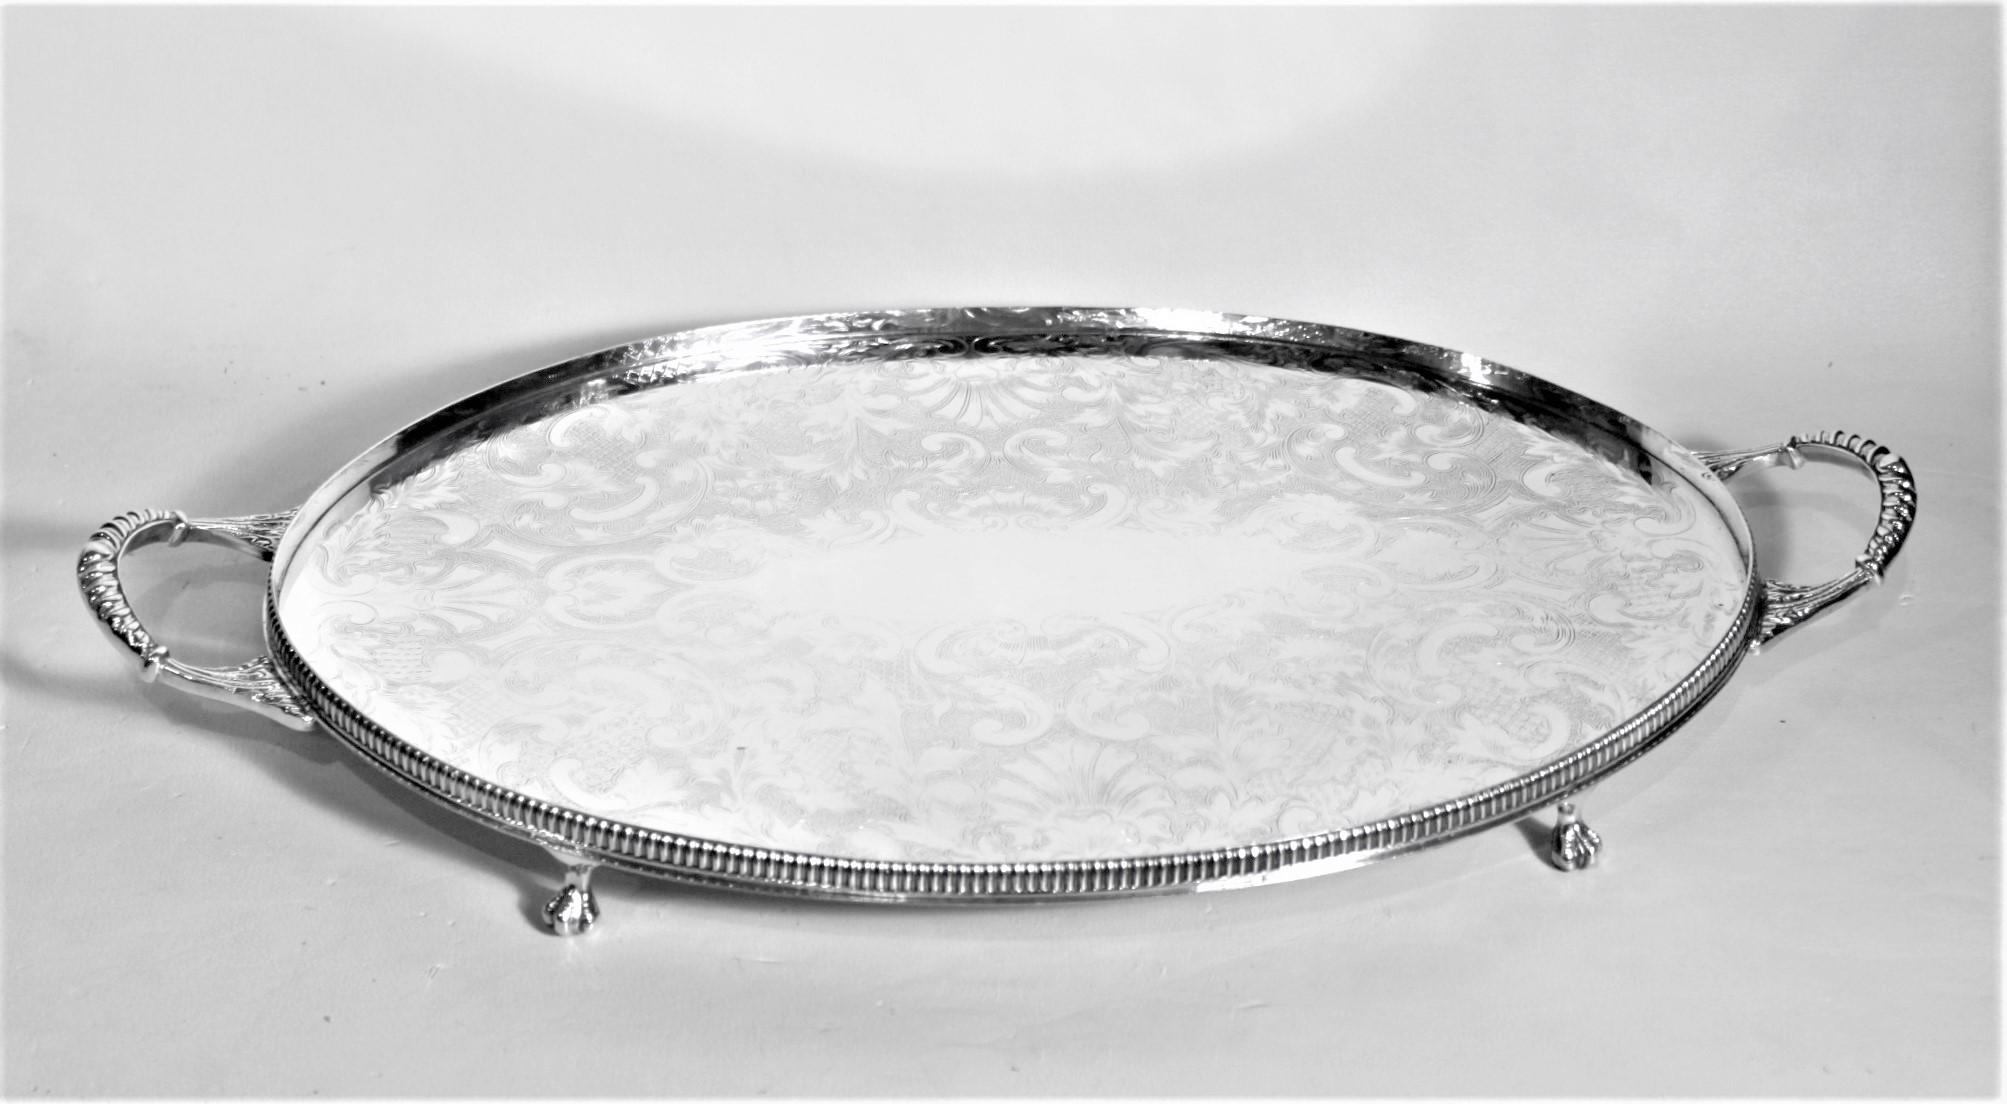 This Sheffield Reproduction silver plated gallery tray was made in Sheffield England in approximately 1920 in a Victorian style. This oval tray has a low gallery and applied handles with talon feet. The top surface of the tray is ornately engraved